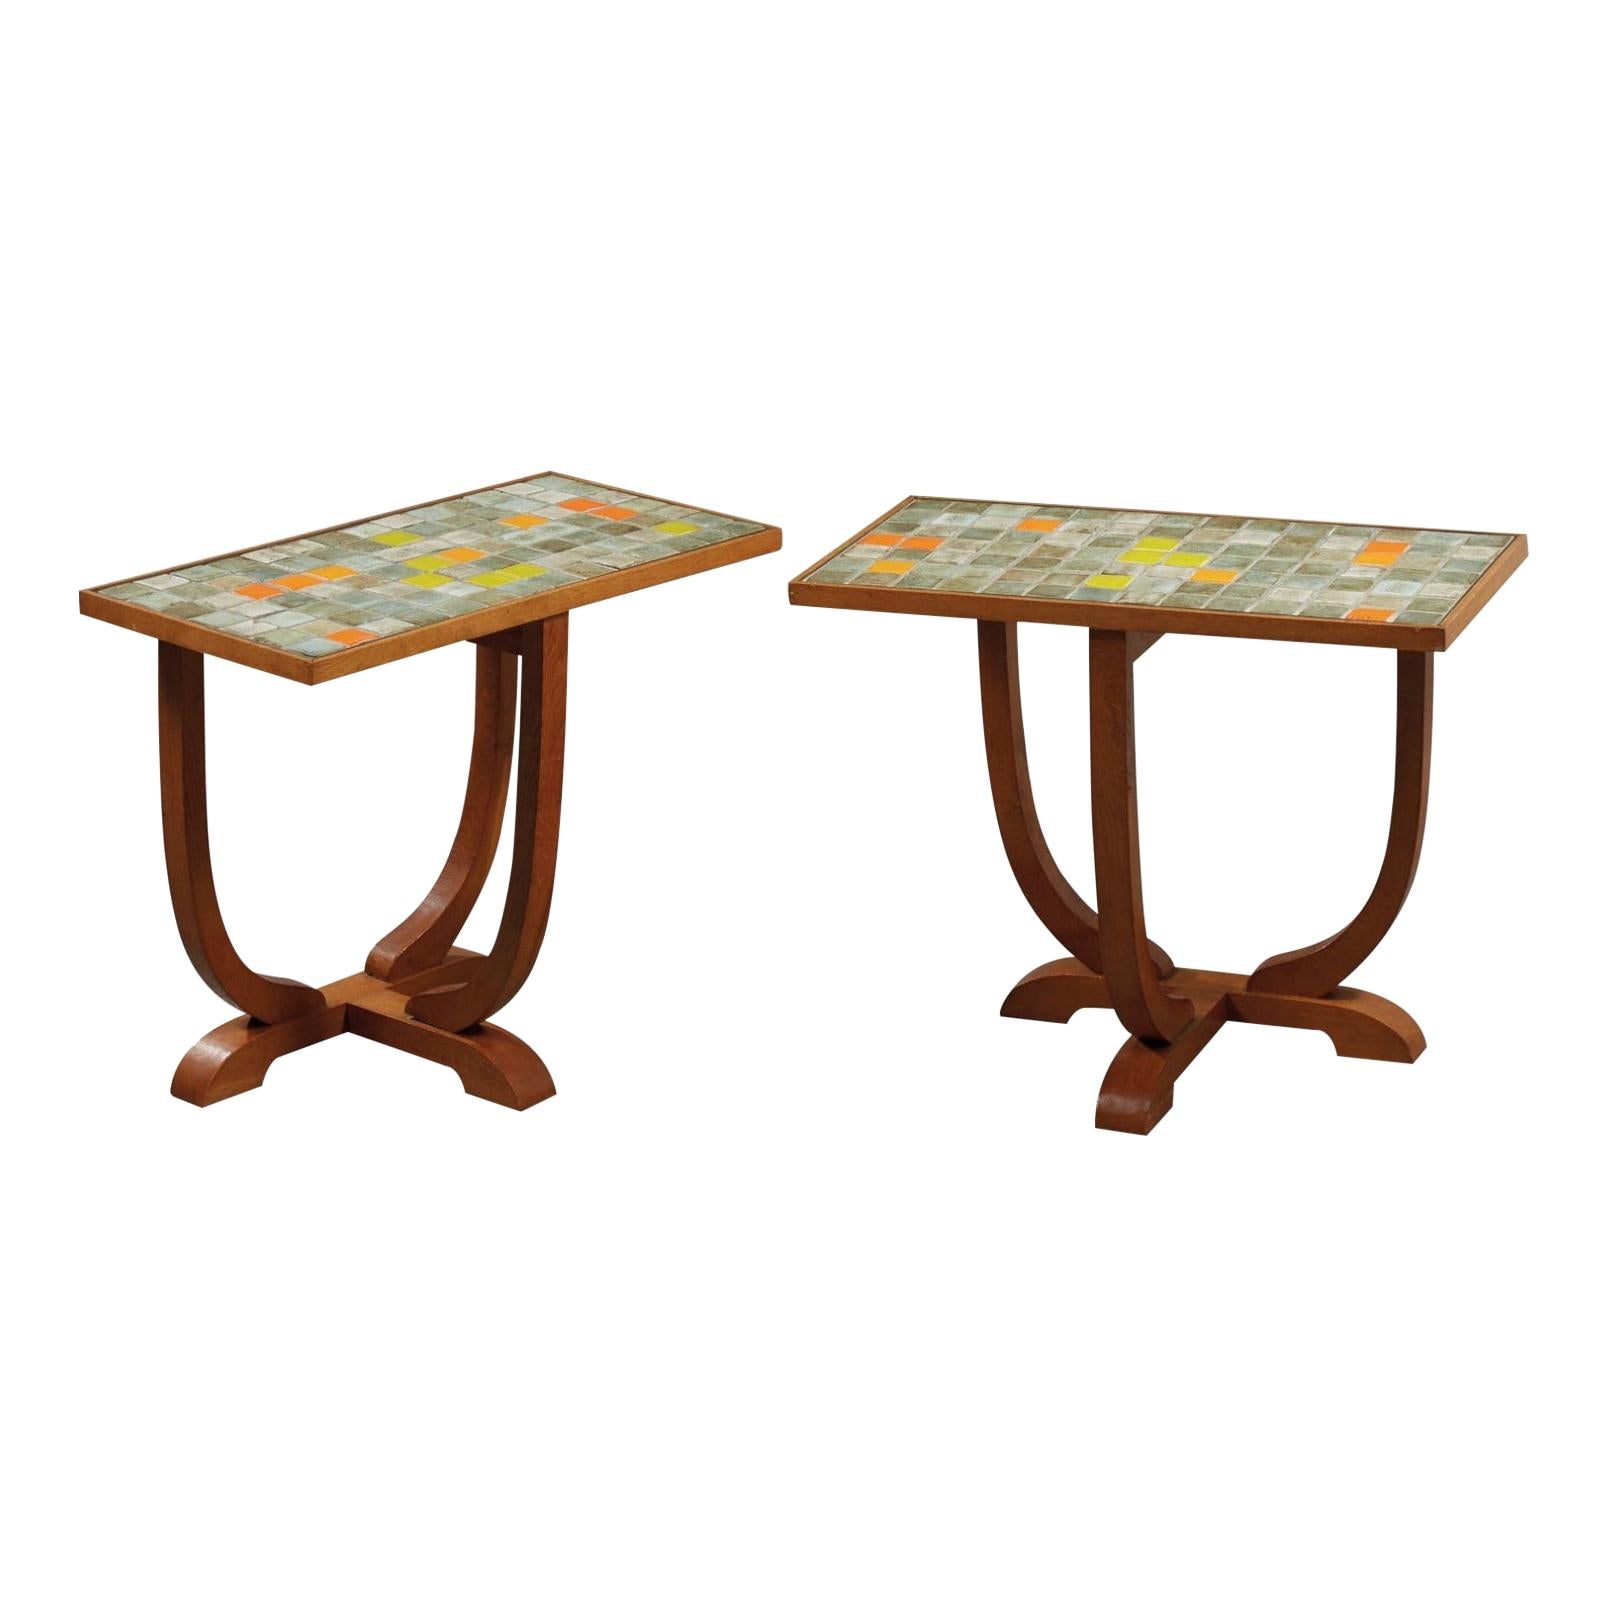 Pair of Ceramic Side Tables by Les 2 Potiers, France, 1960s